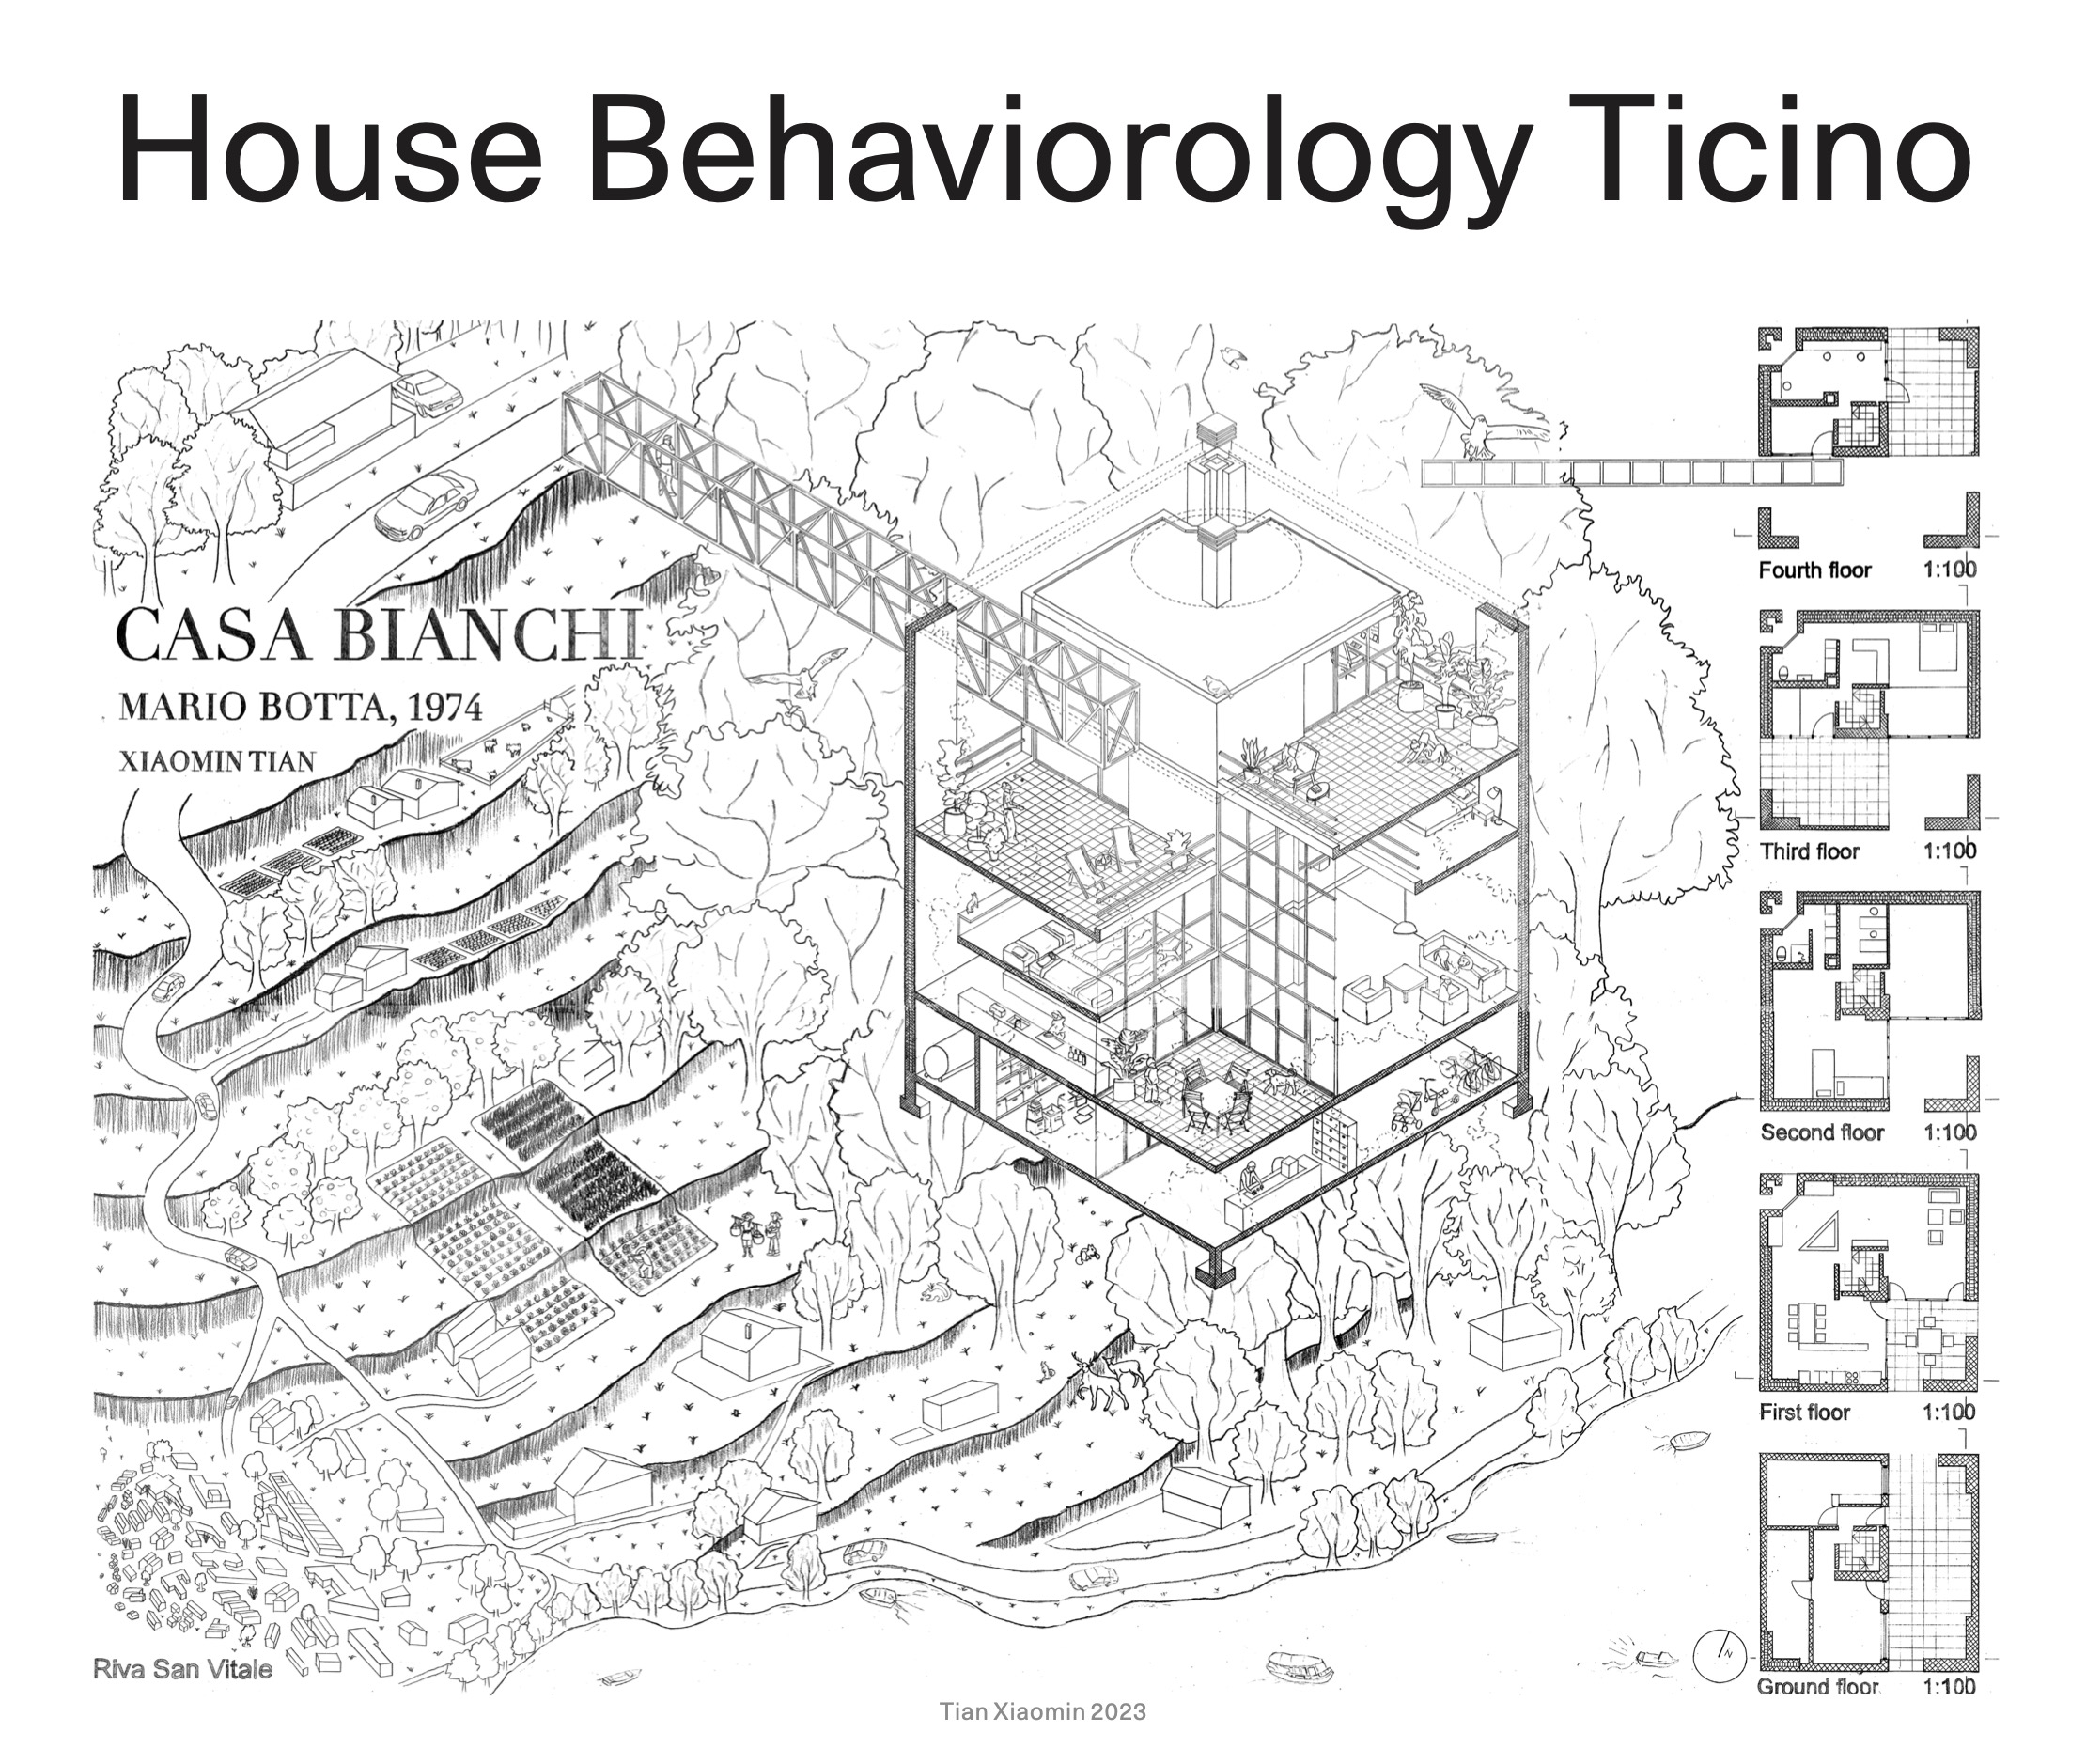 https://i2a.ch/mostra-house-behaviorology-in-ticino